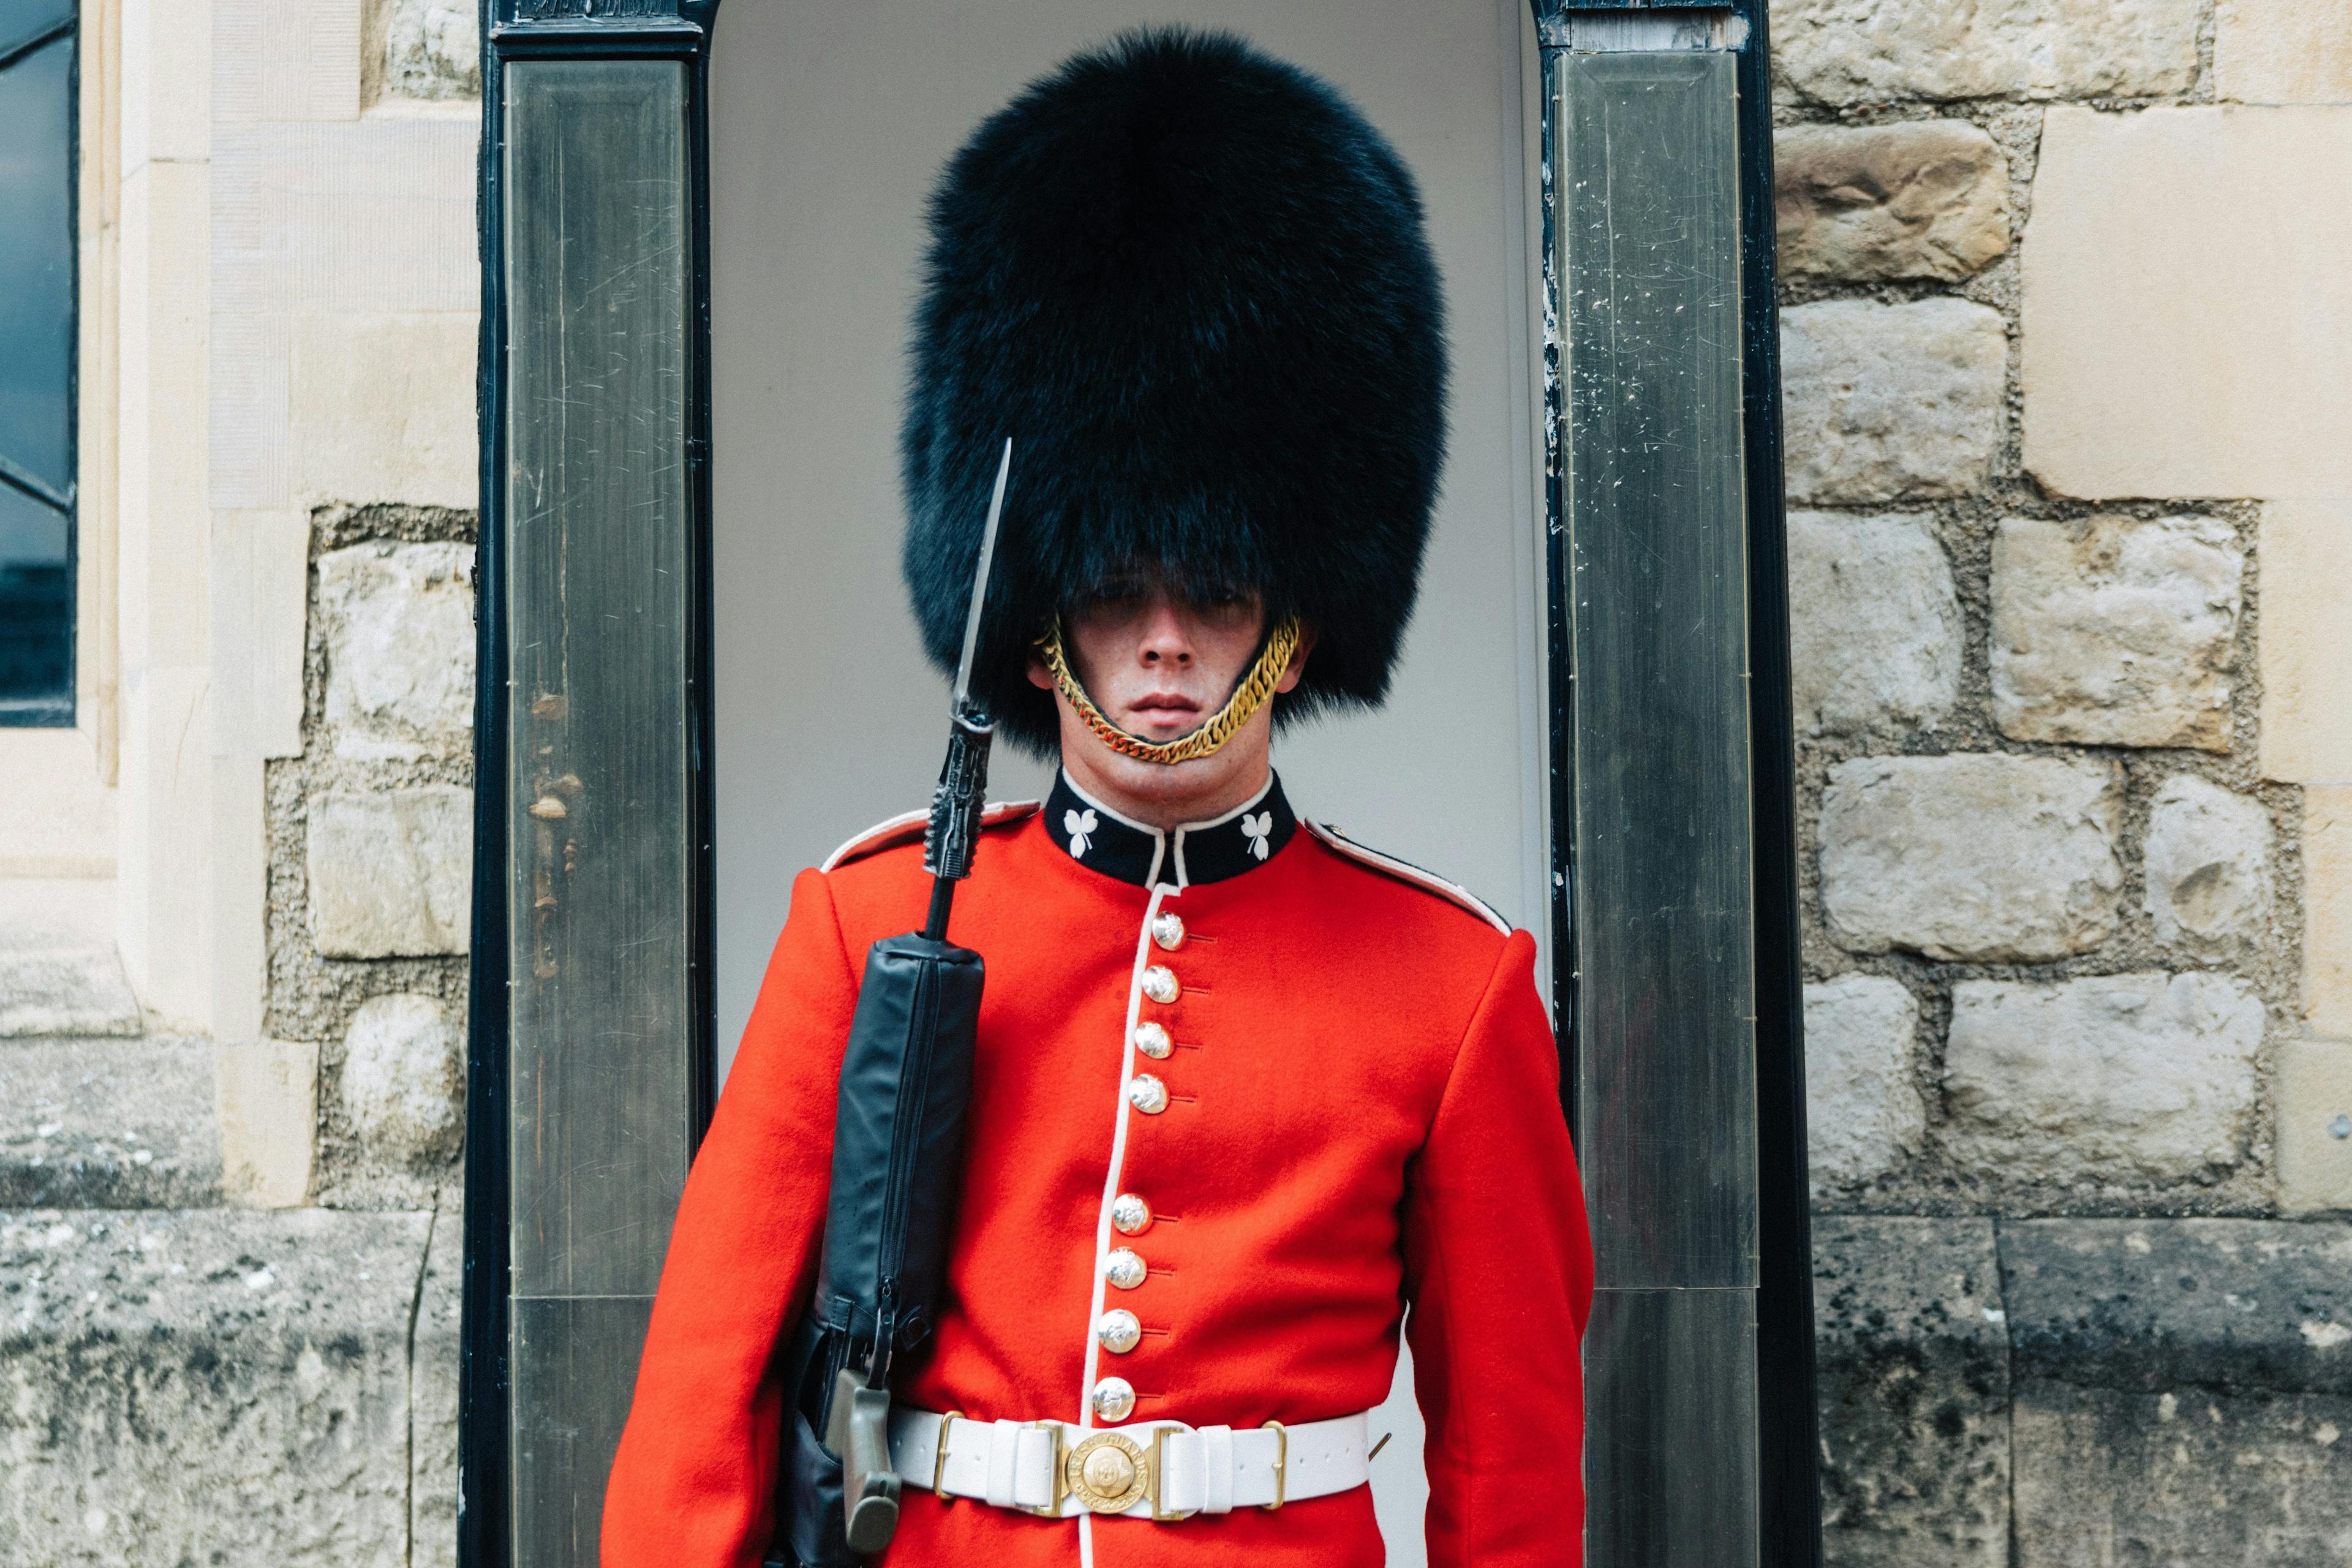 British beefeater standing next to a wall